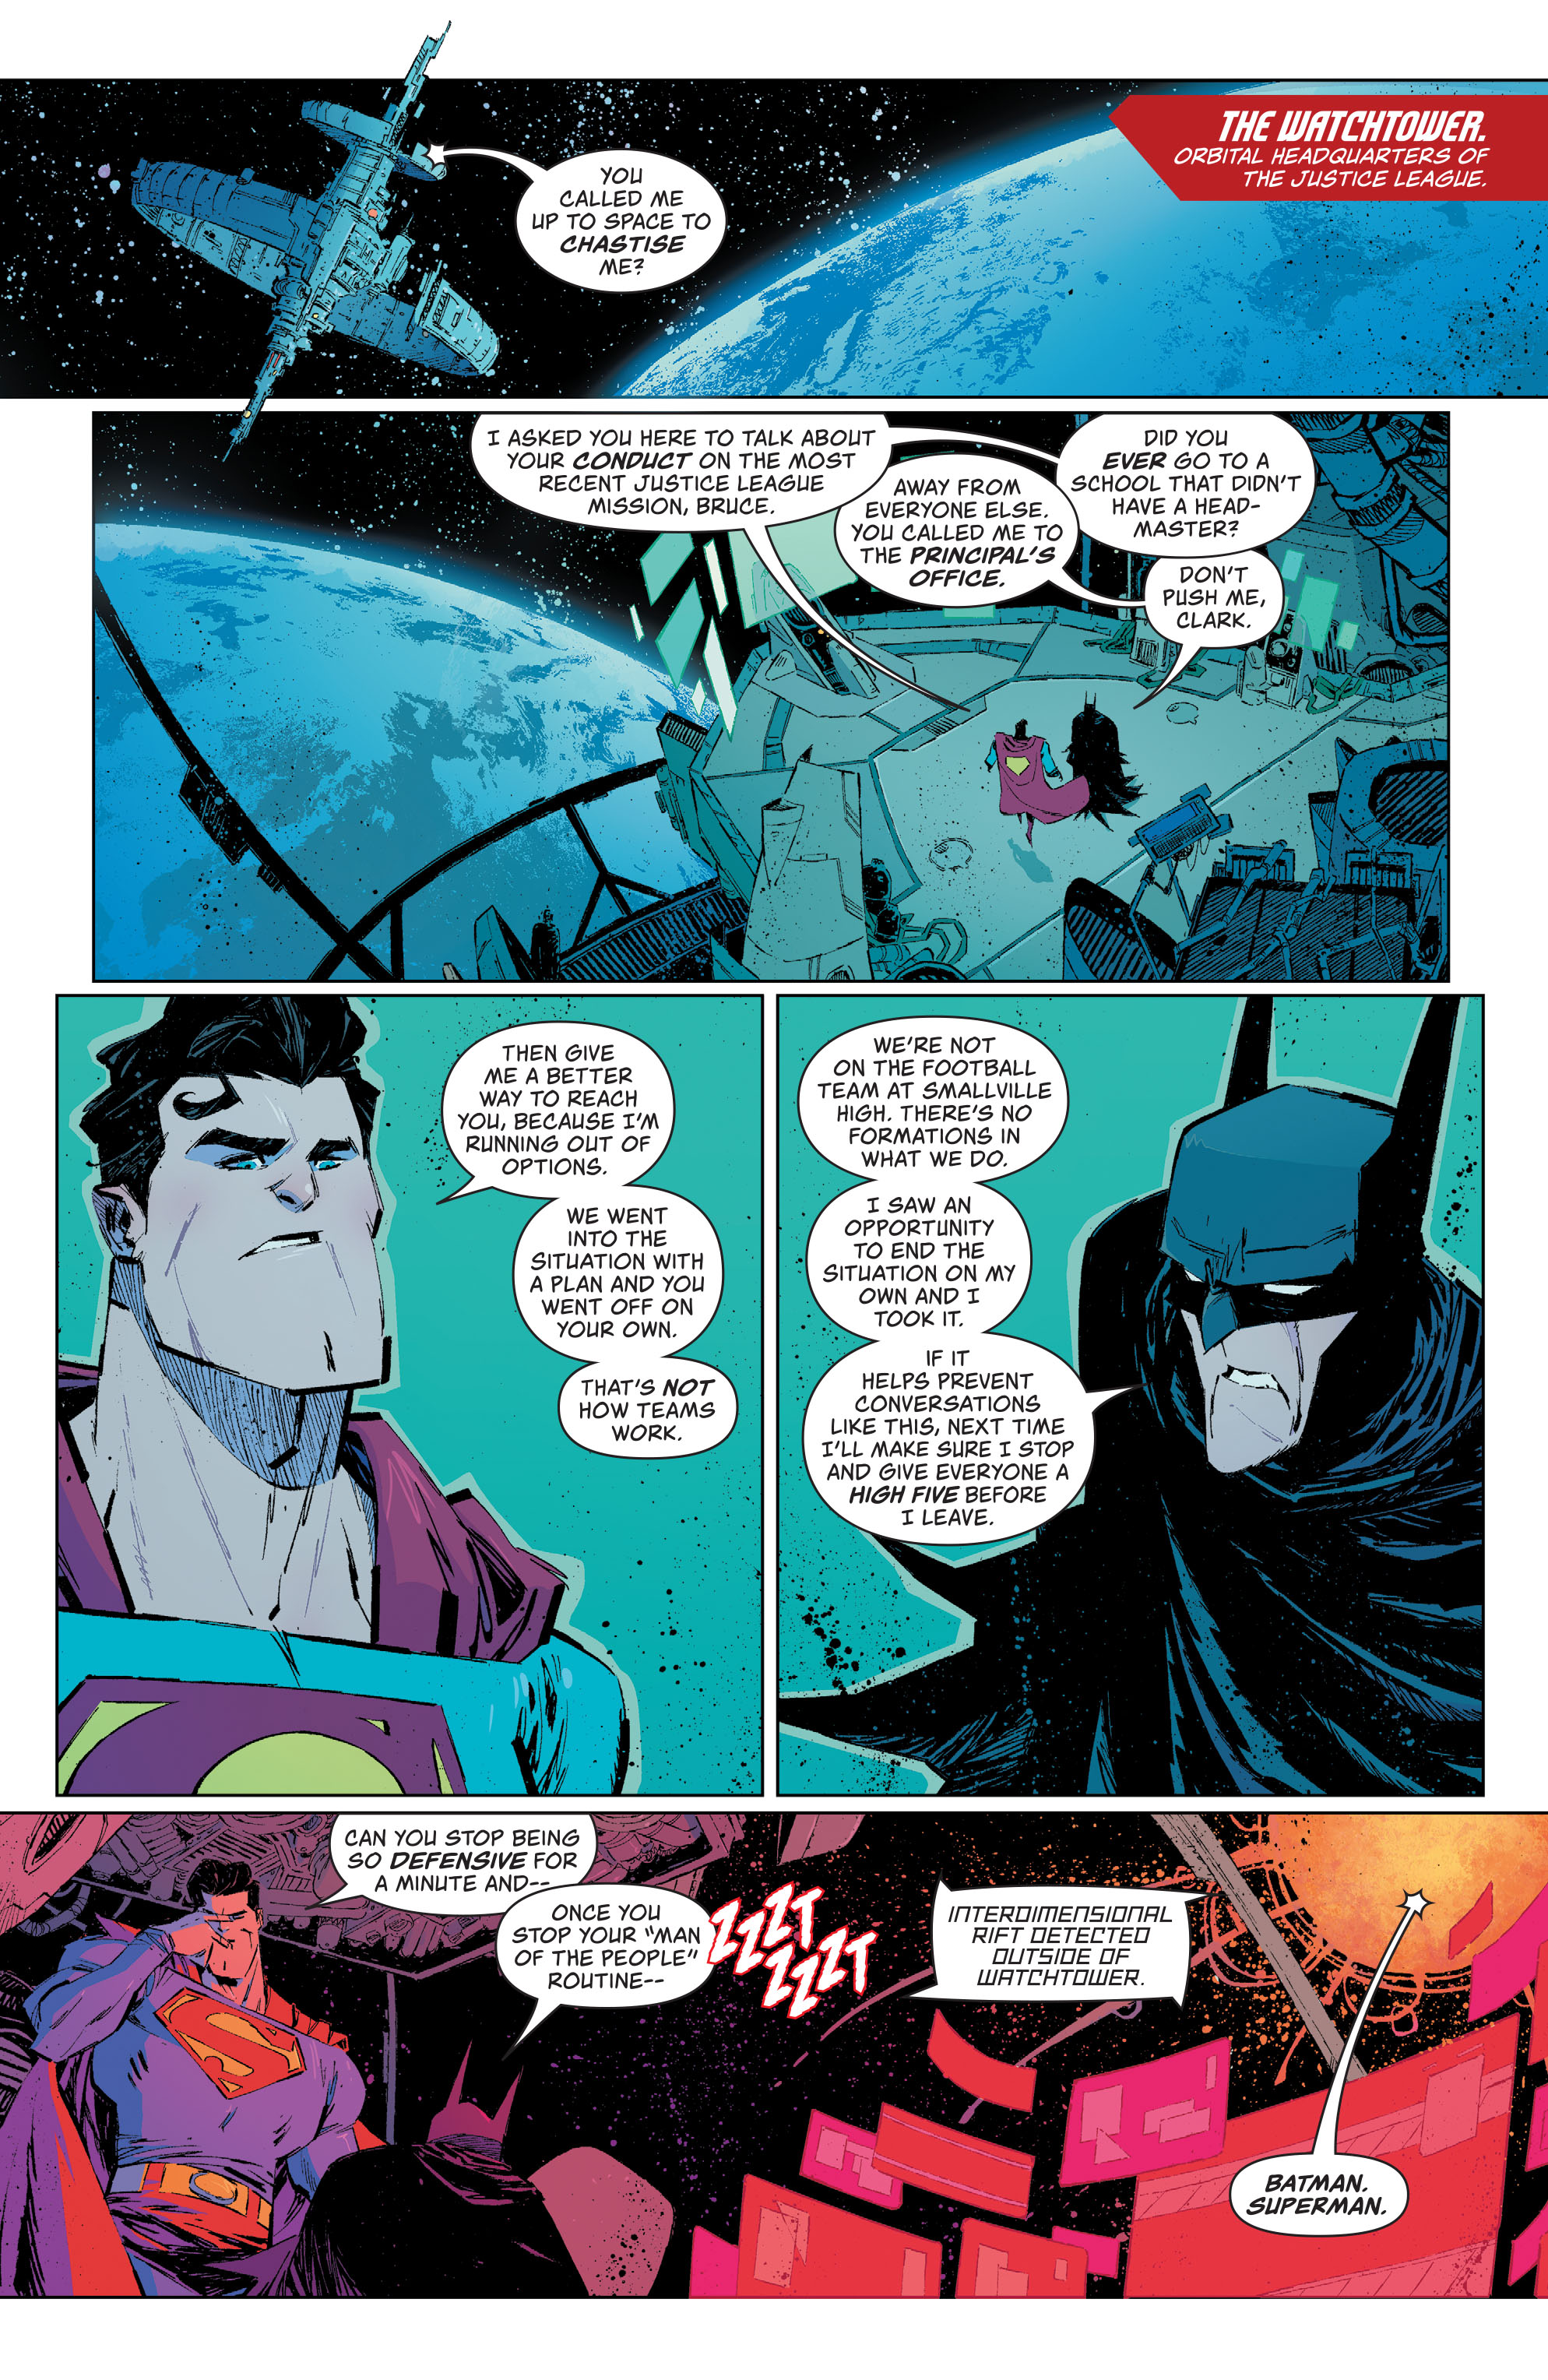 Superman: Man of Tomorrow (2020-): Chapter 19 - Page 2